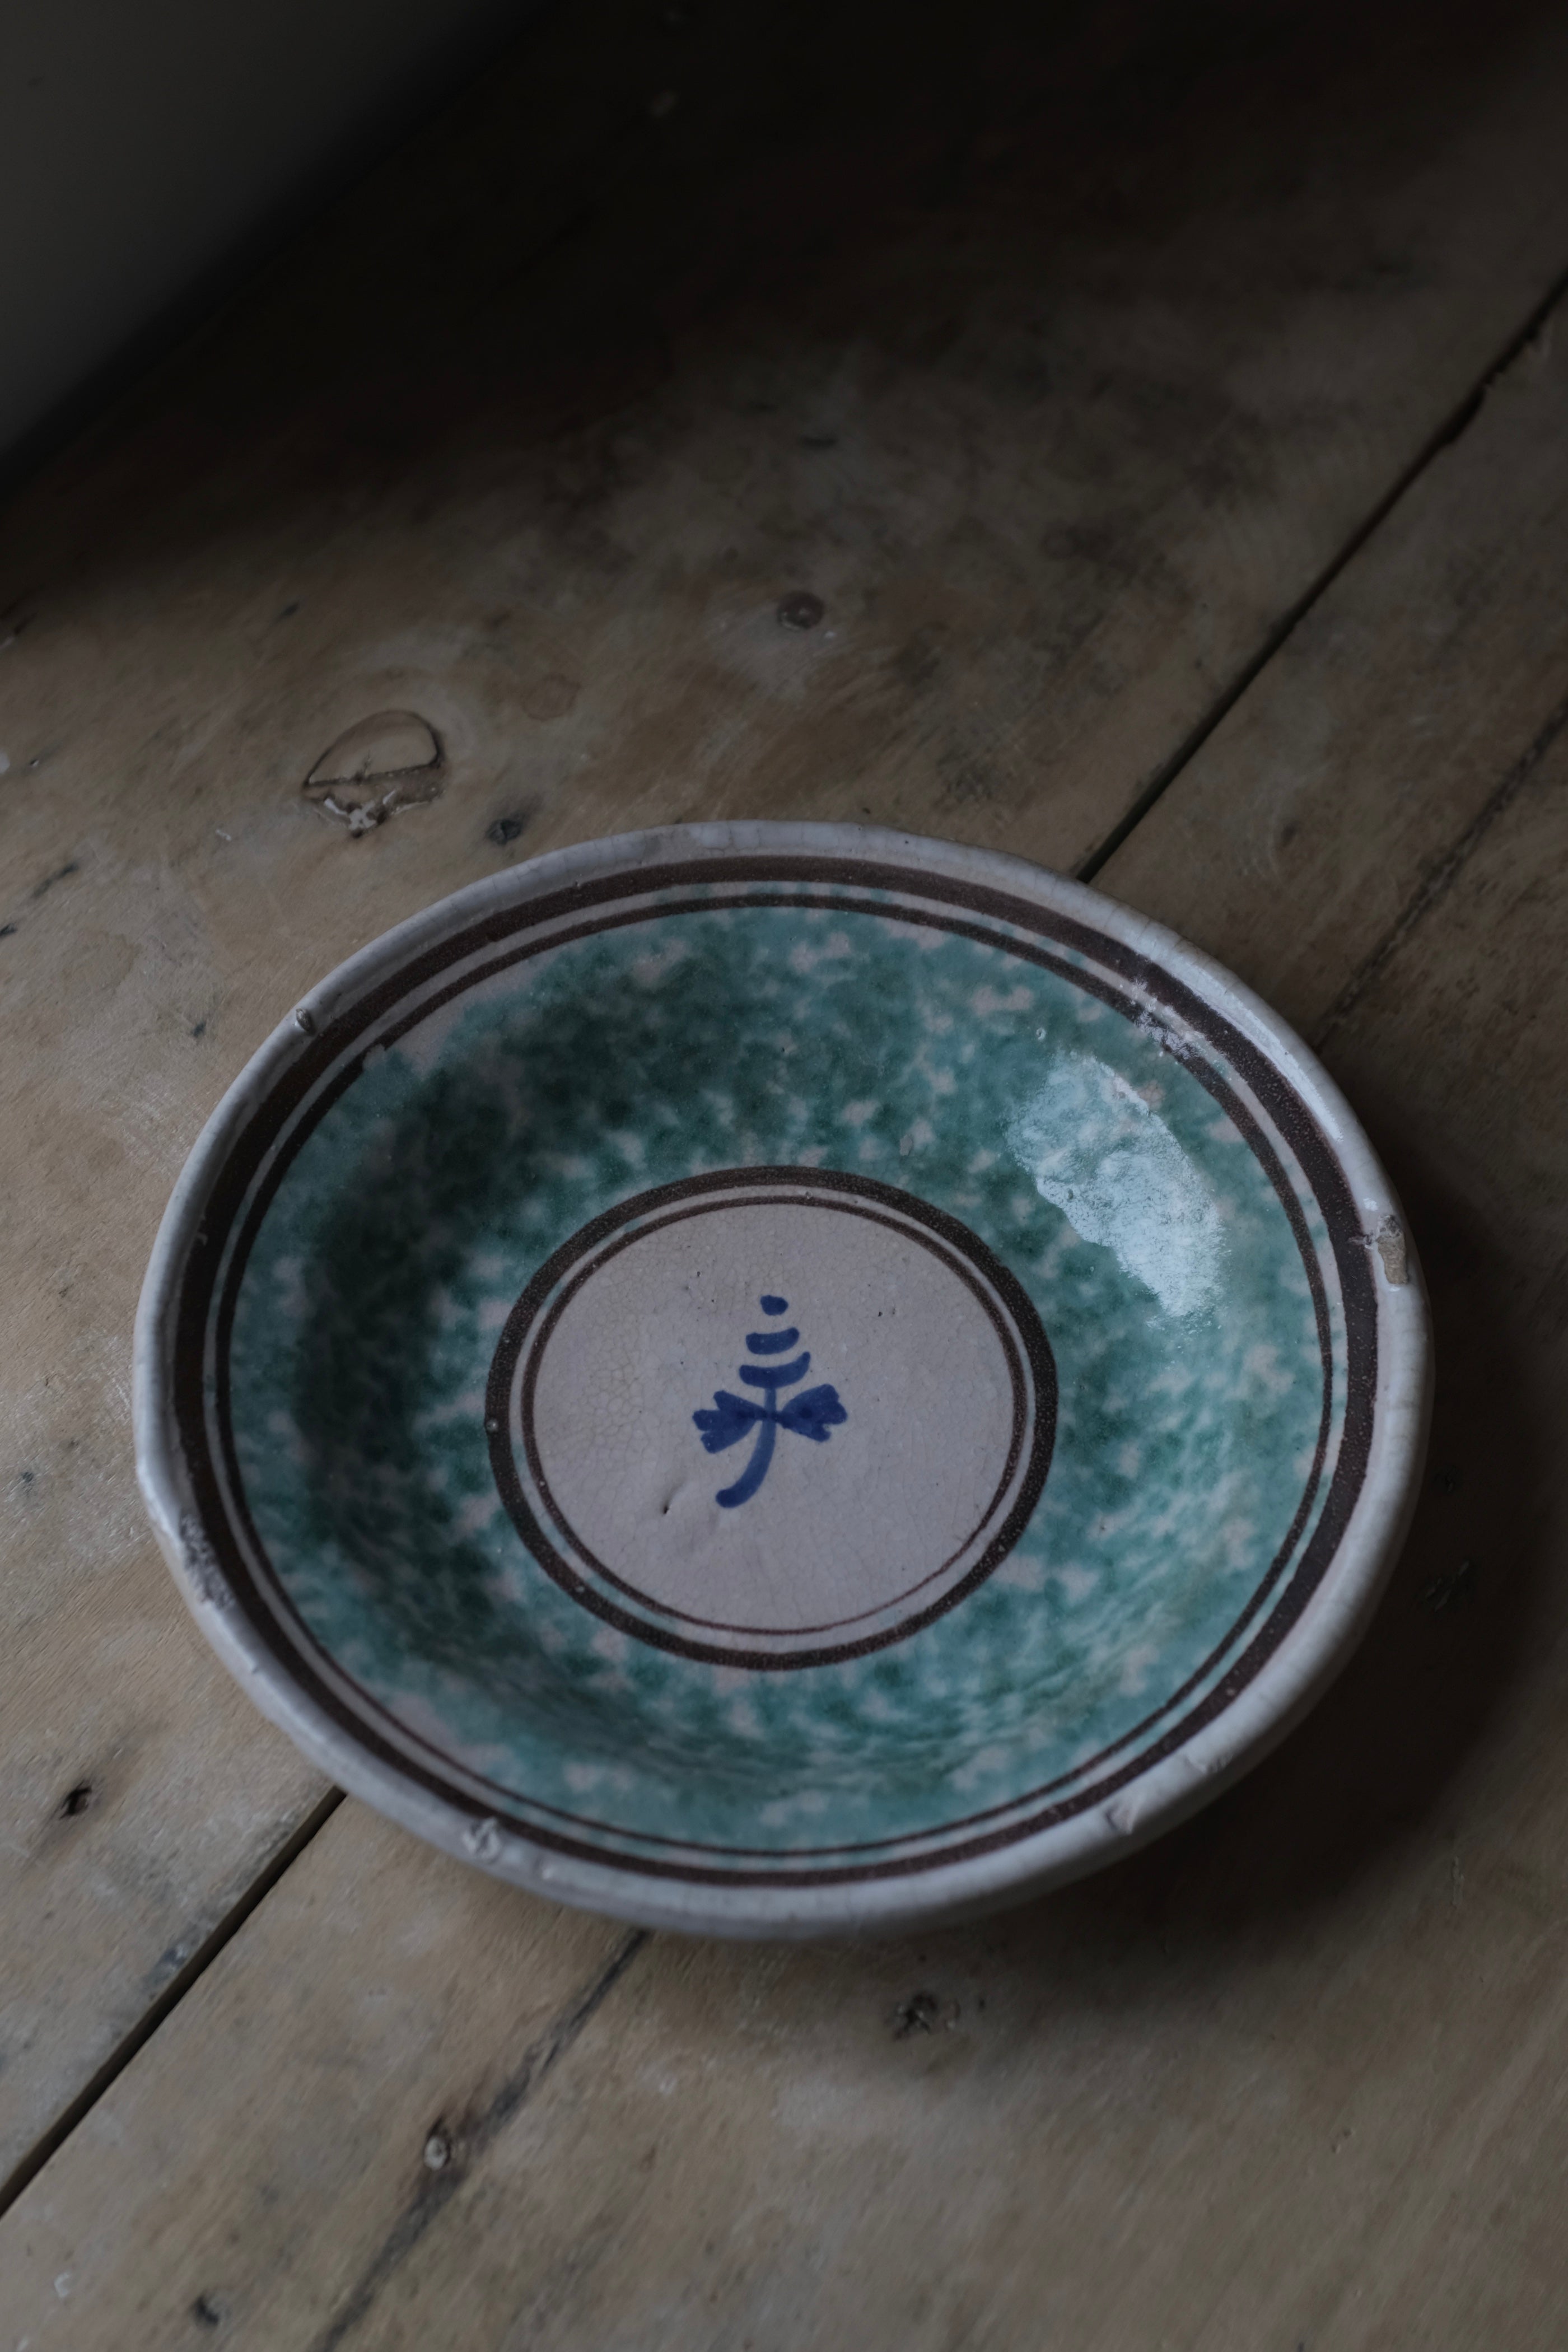 Italy Antique Puglia Plate / プーリア イタリア アンティーク